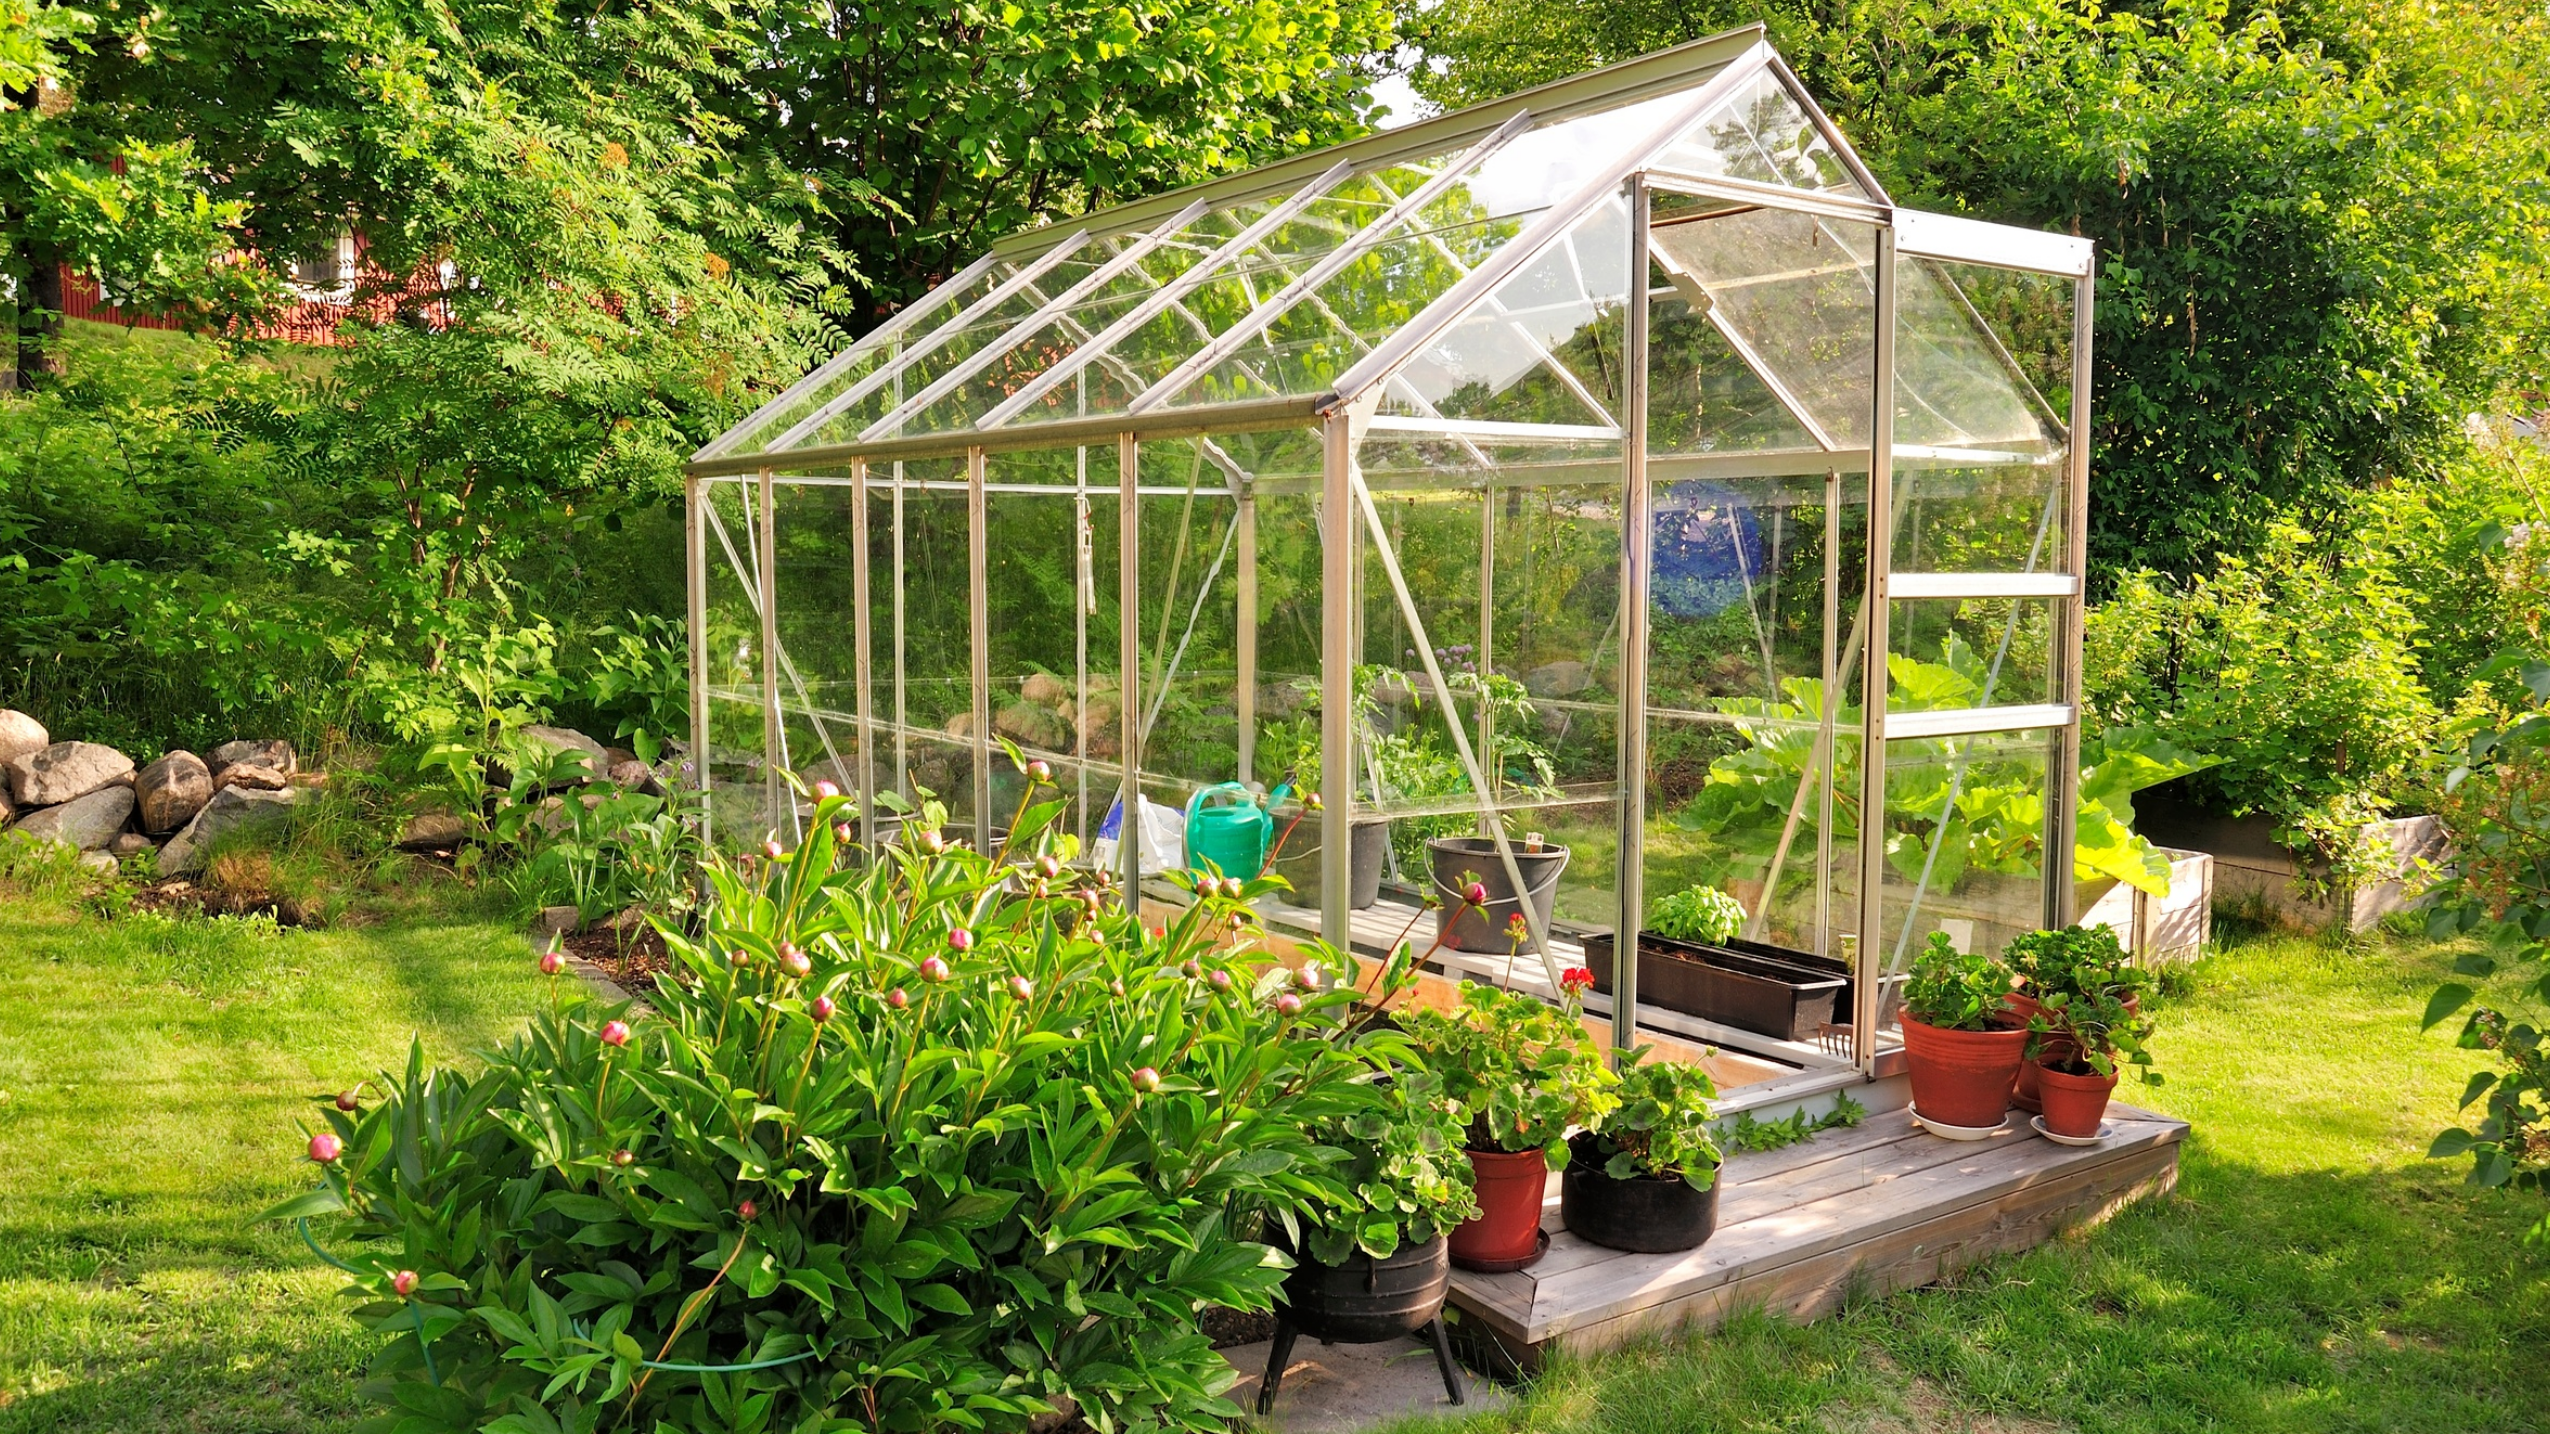 Greenhouse Supply List - Important Items For Greenhouse Gardening